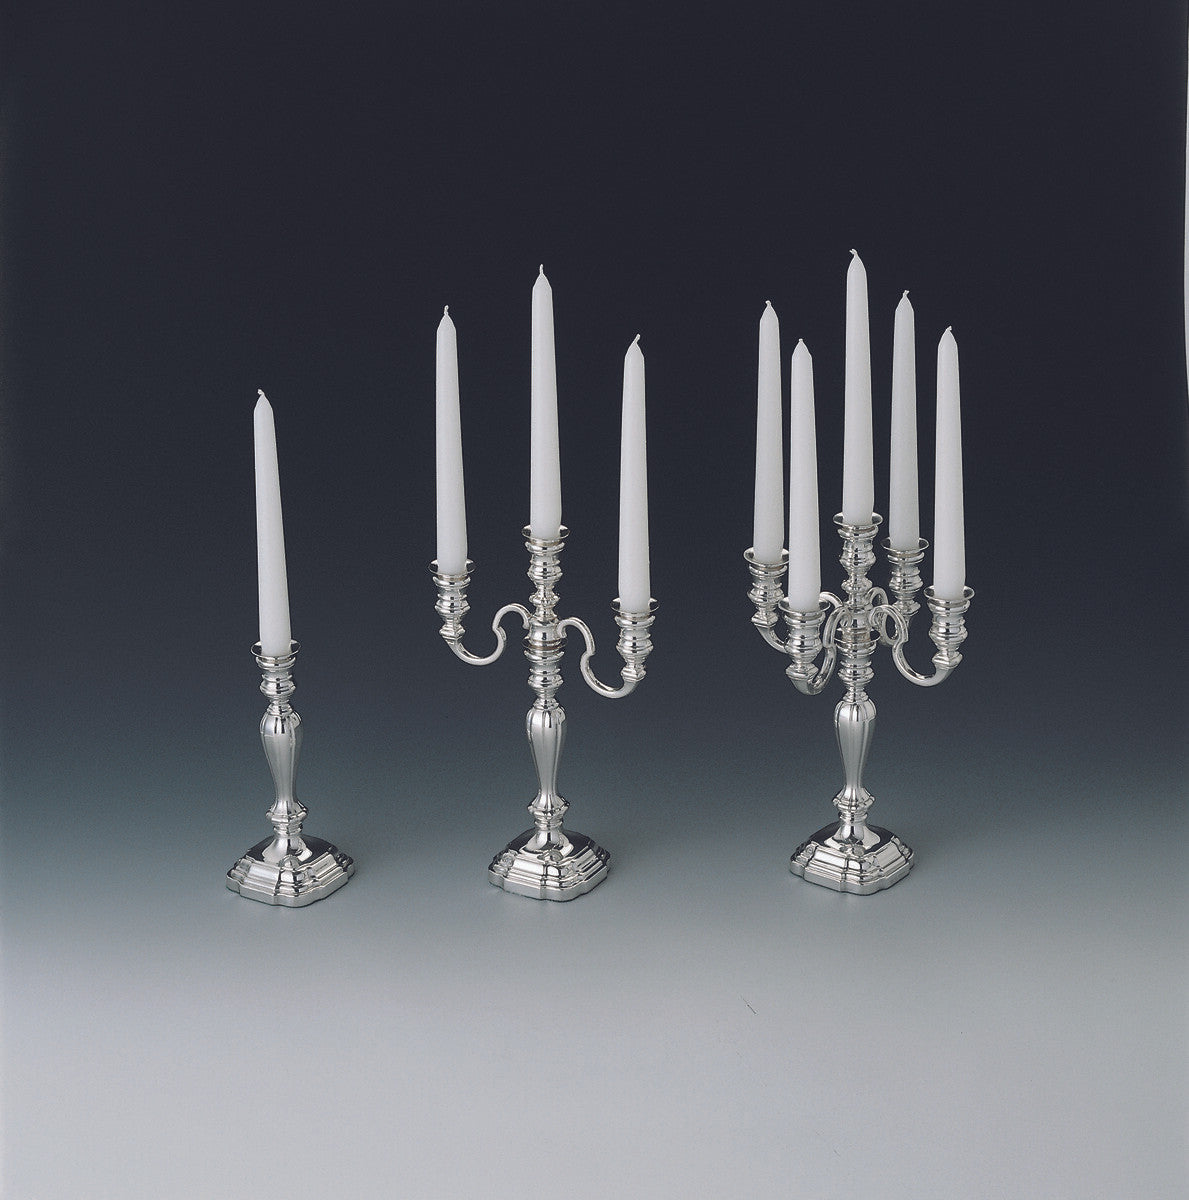 Alt-Augsburg Candle Holder Collection (L to R: One, Three, and Five Light)